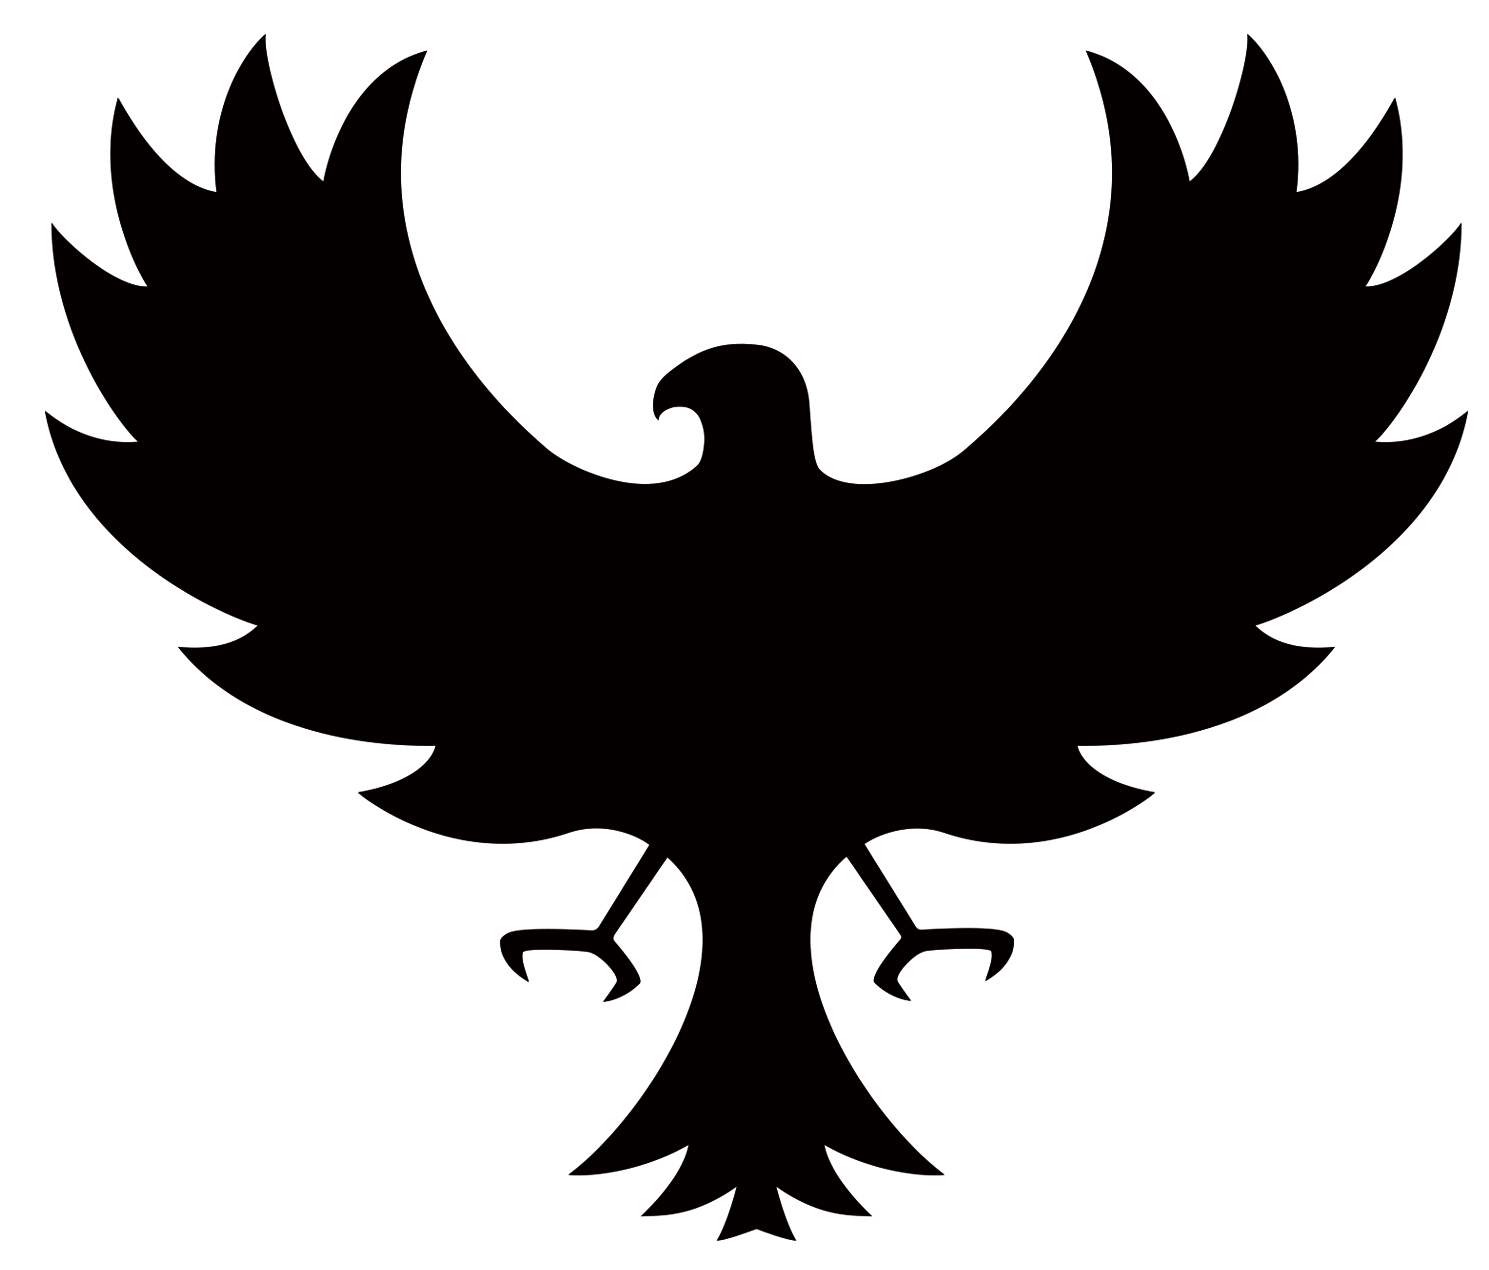 Falcon Png Image - Falcon, Transparent background PNG HD thumbnail